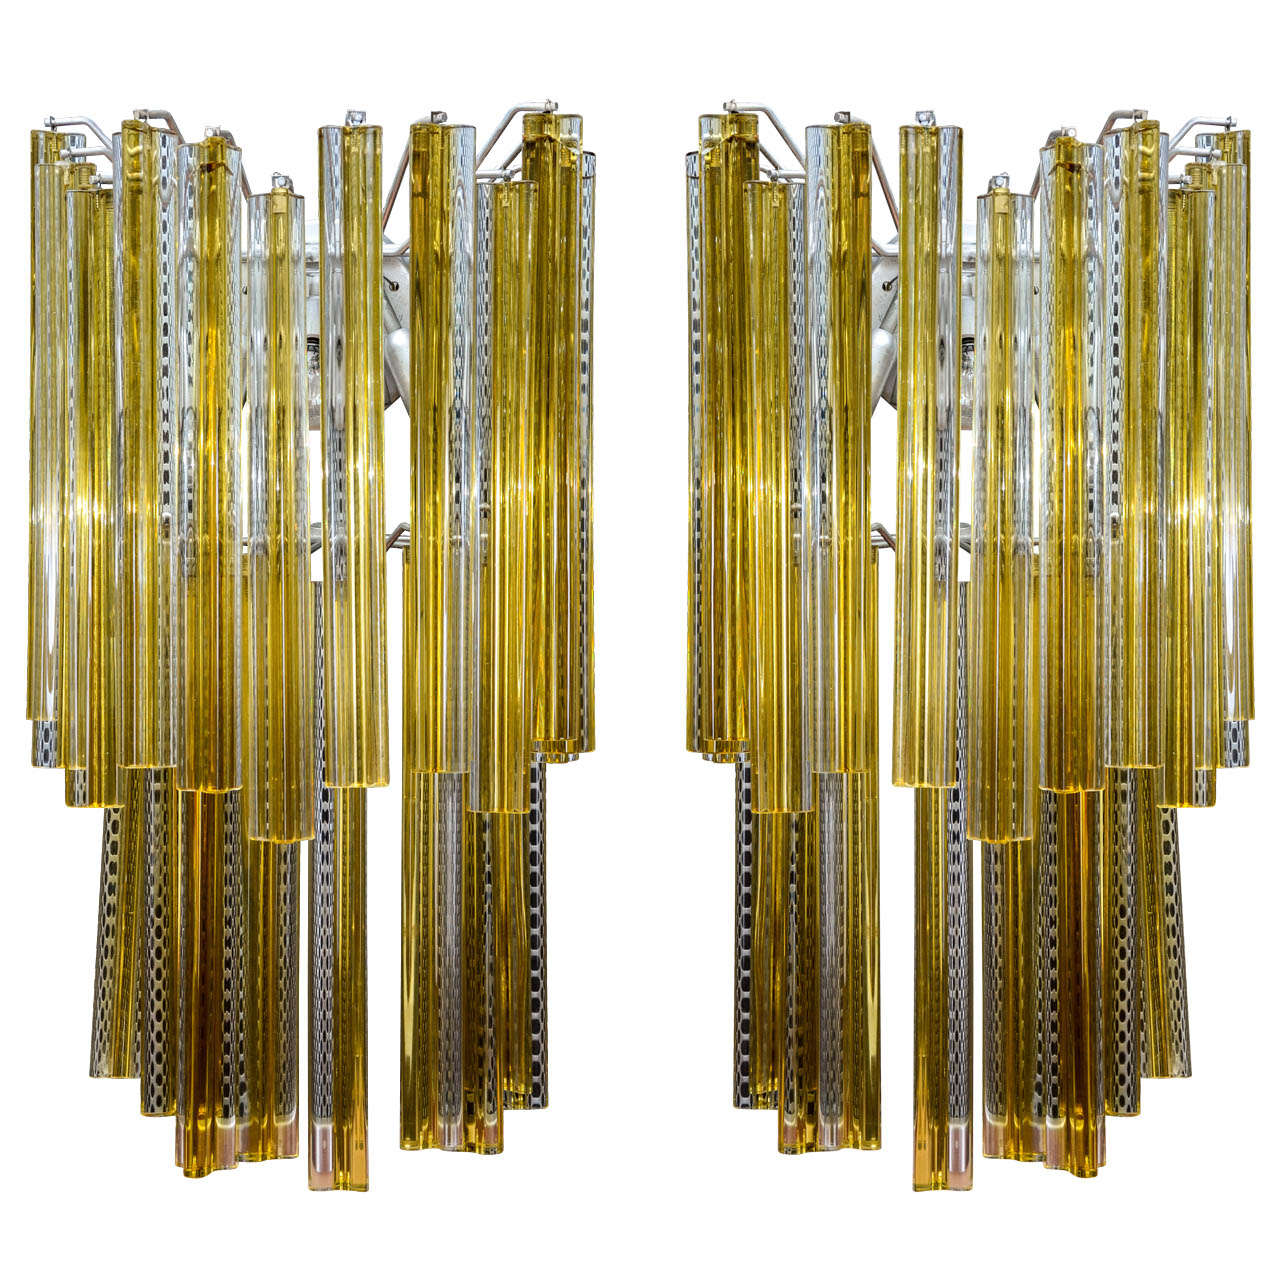 Pair of Murano Glass Sconces by Veronese